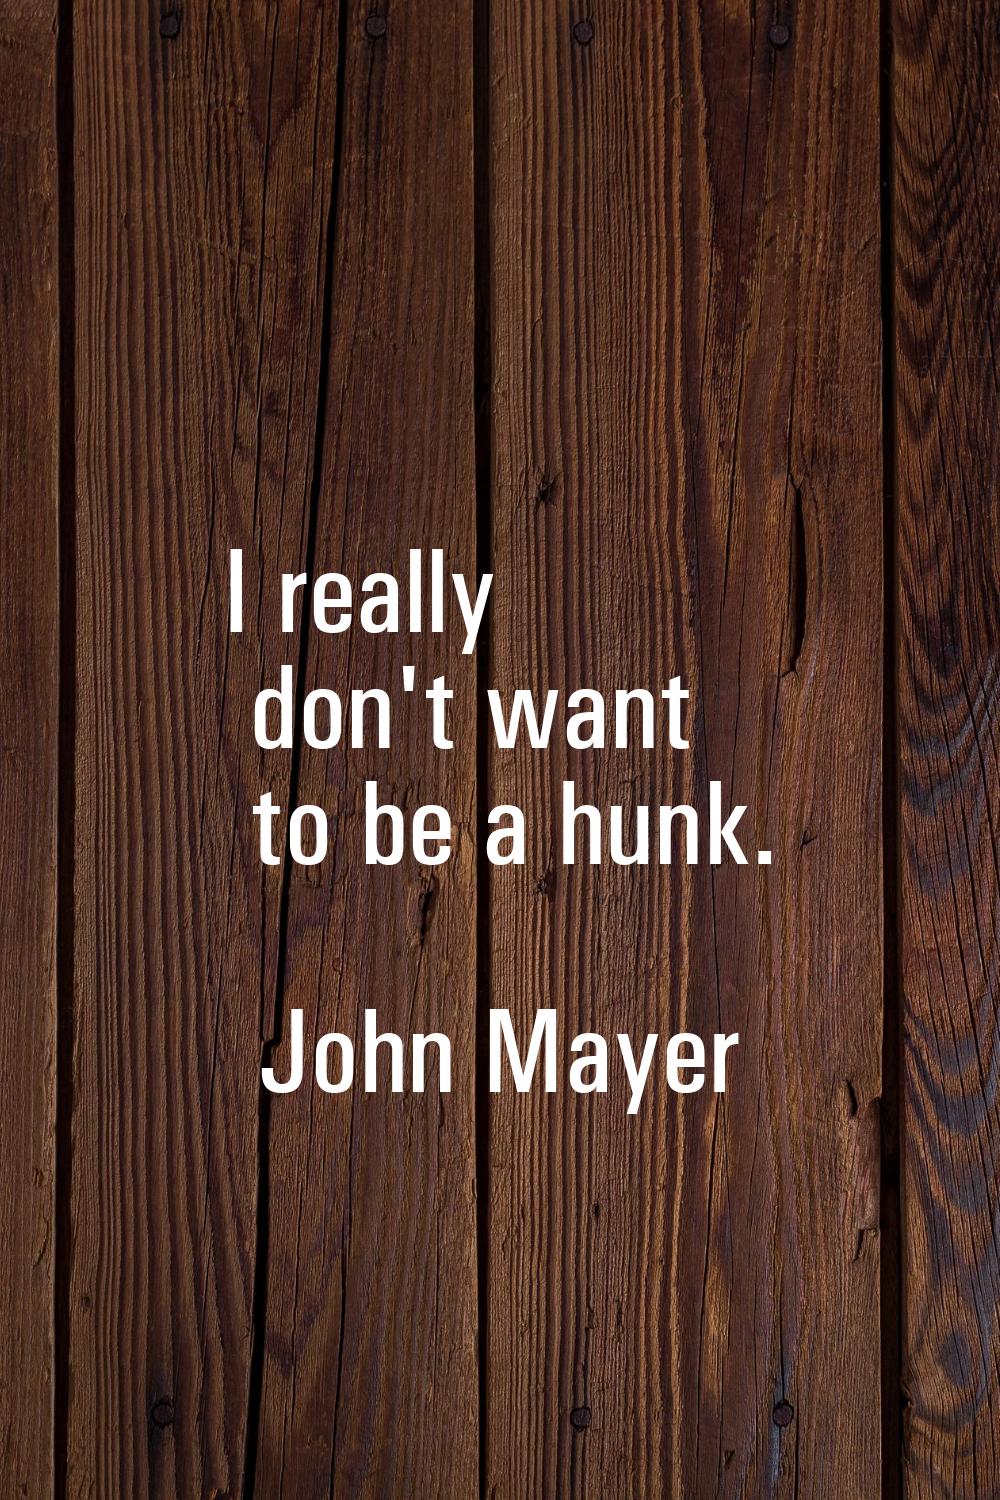 I really don't want to be a hunk.